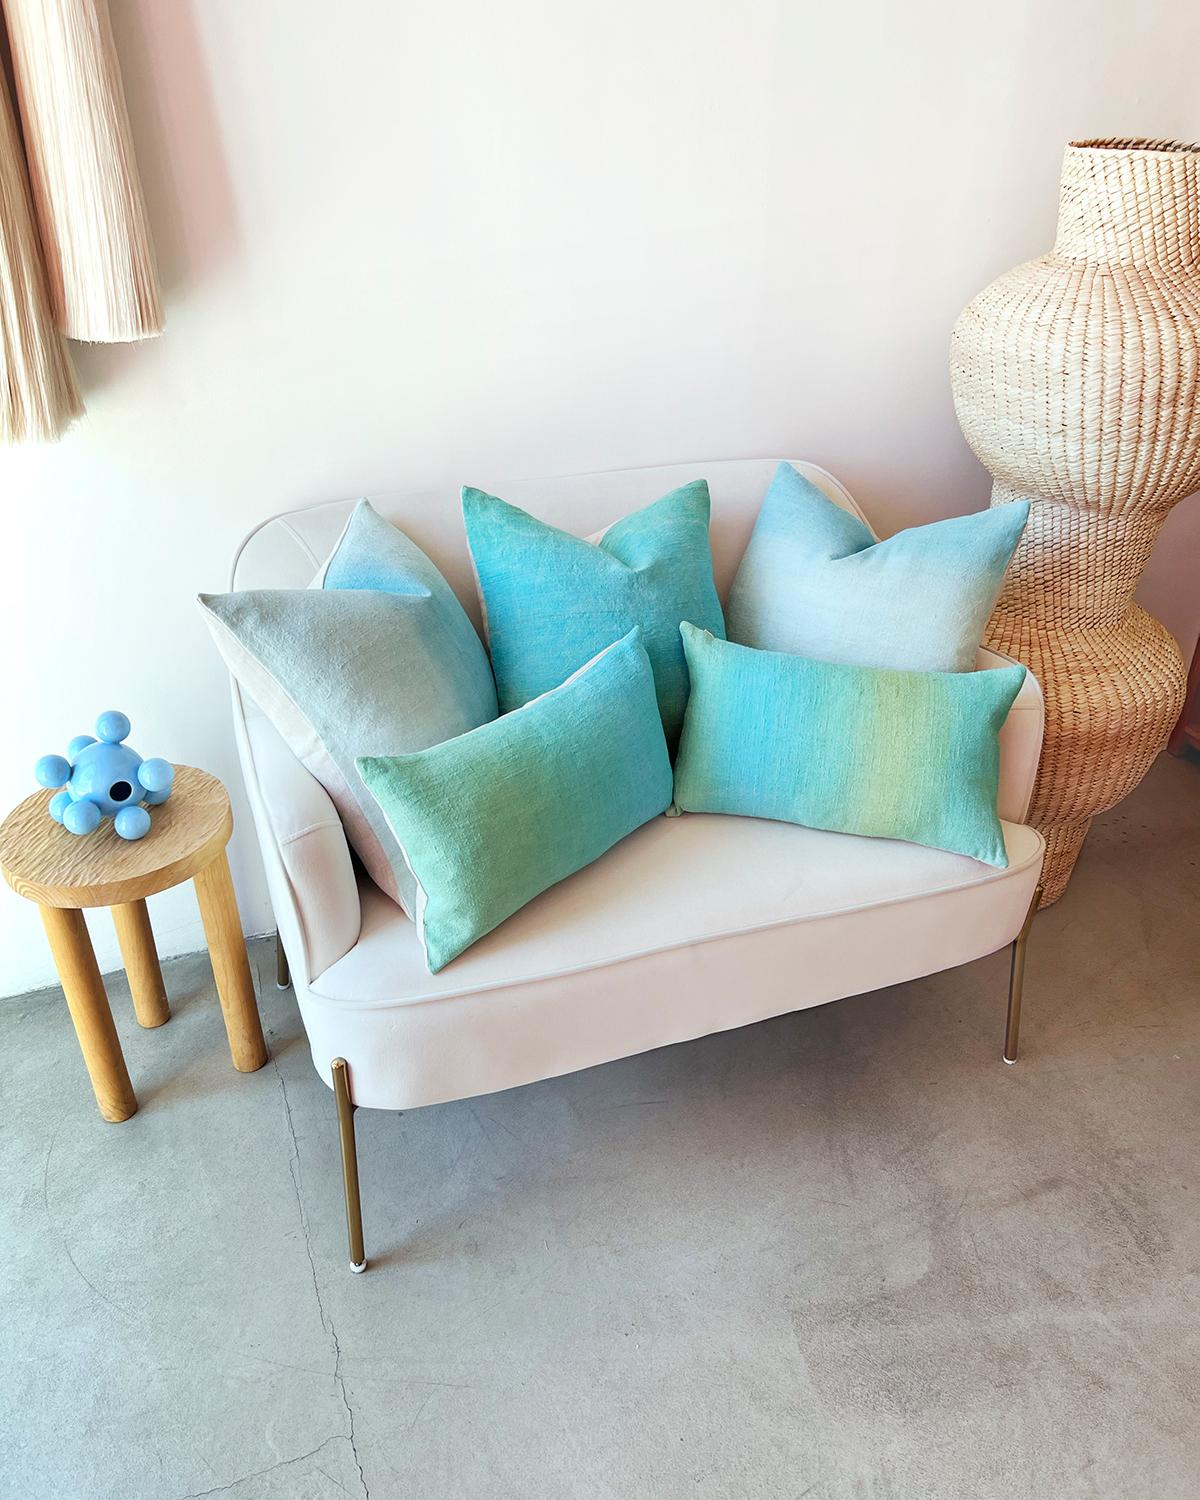 These hand made baby blue and sky blue ombre cushions are the perfect pop of color to brighten up your space. Hand made from natural materials like vintage linen, they are sure to make your living room or bedroom feel more modern while adding a